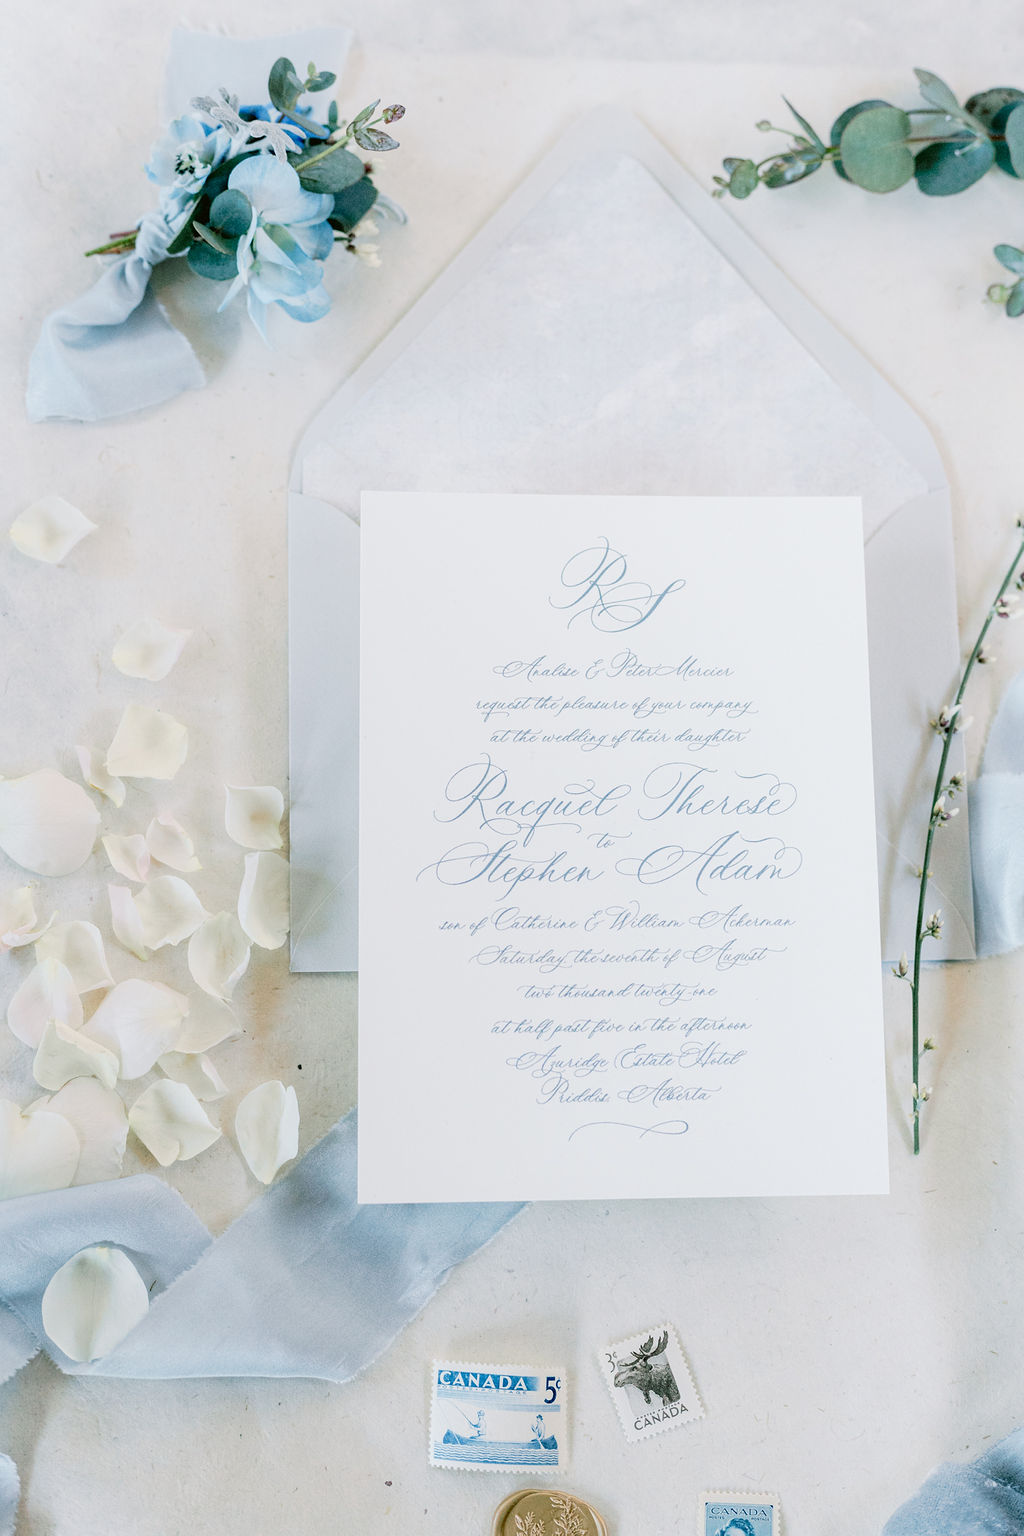 Classic white, ivory and light blue wedding stationery with blue calligraphy and blue flowers against a linen backdrop